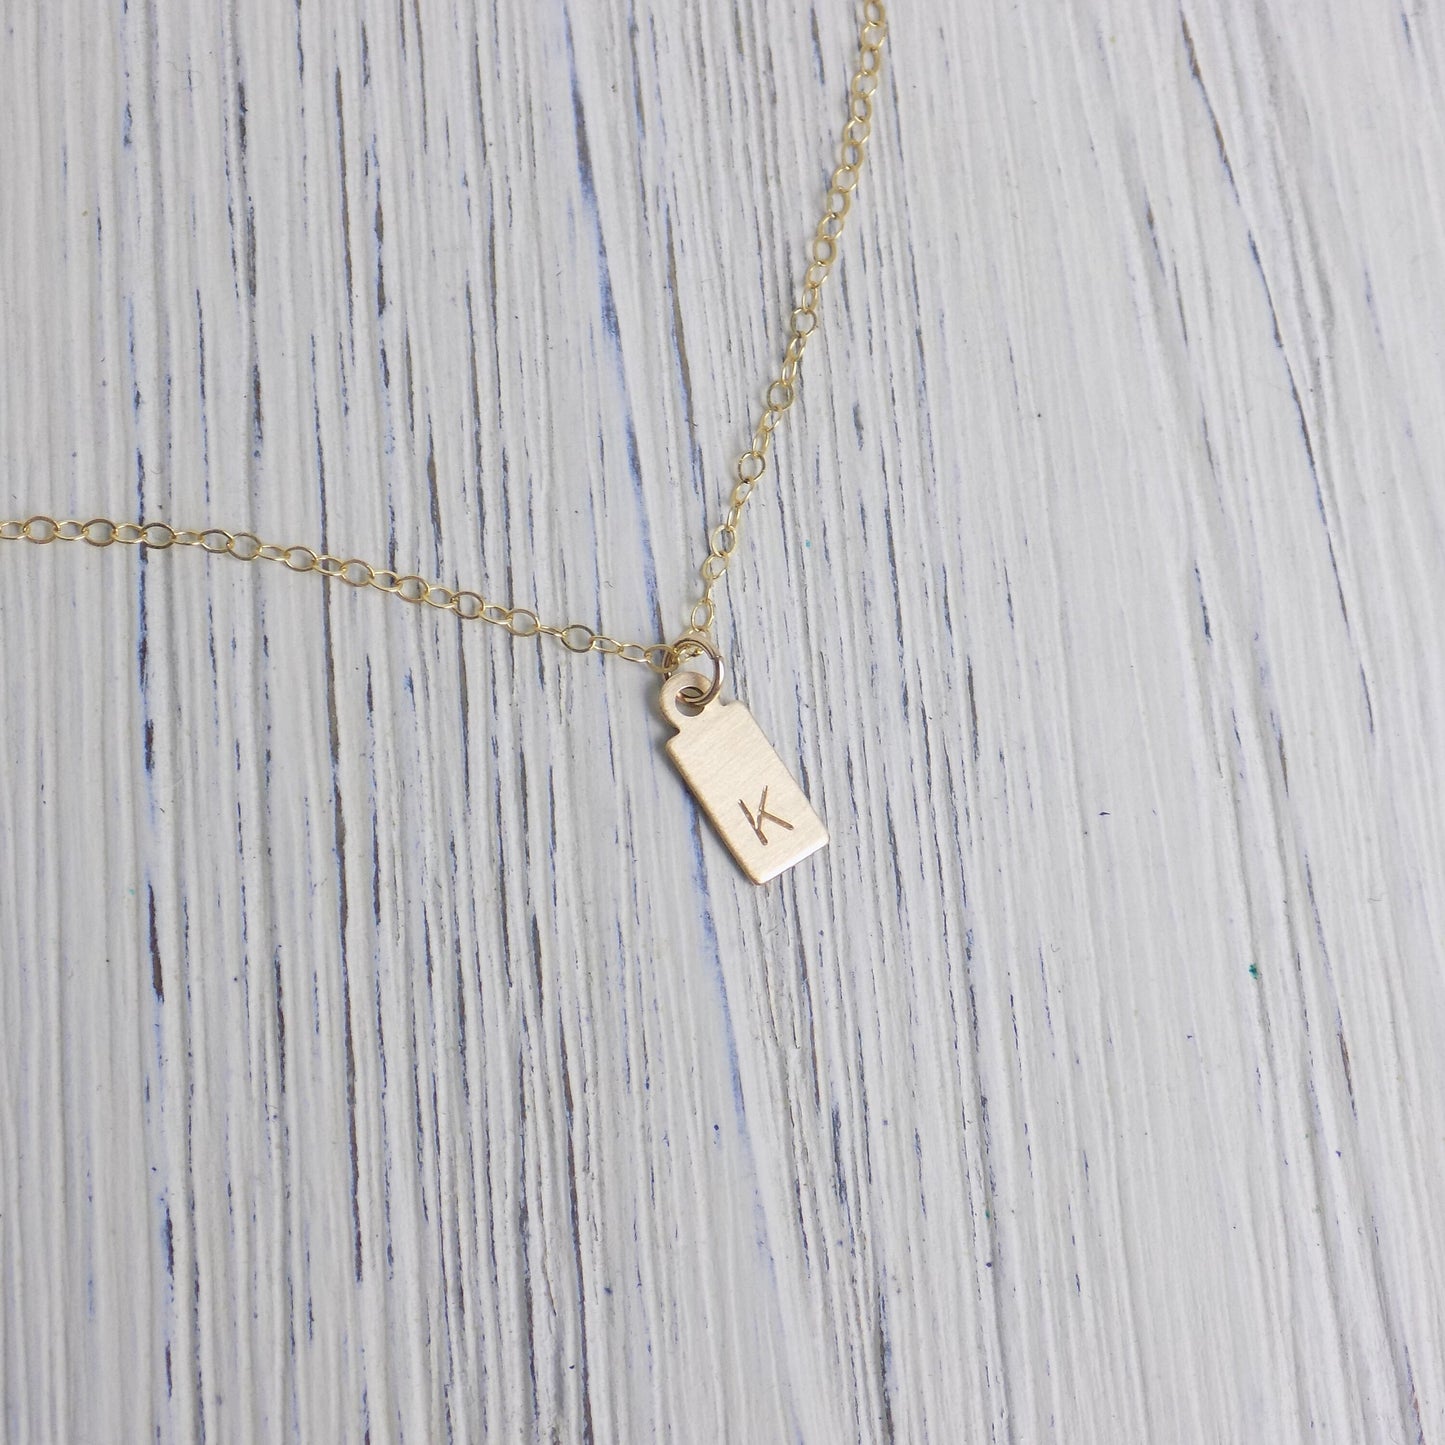 Initial Charm Necklace - Small Tag Initial Necklace Brushed Matte Satin Finish - 14K Gold Filled - Personalized Layering Necklace Gift Women